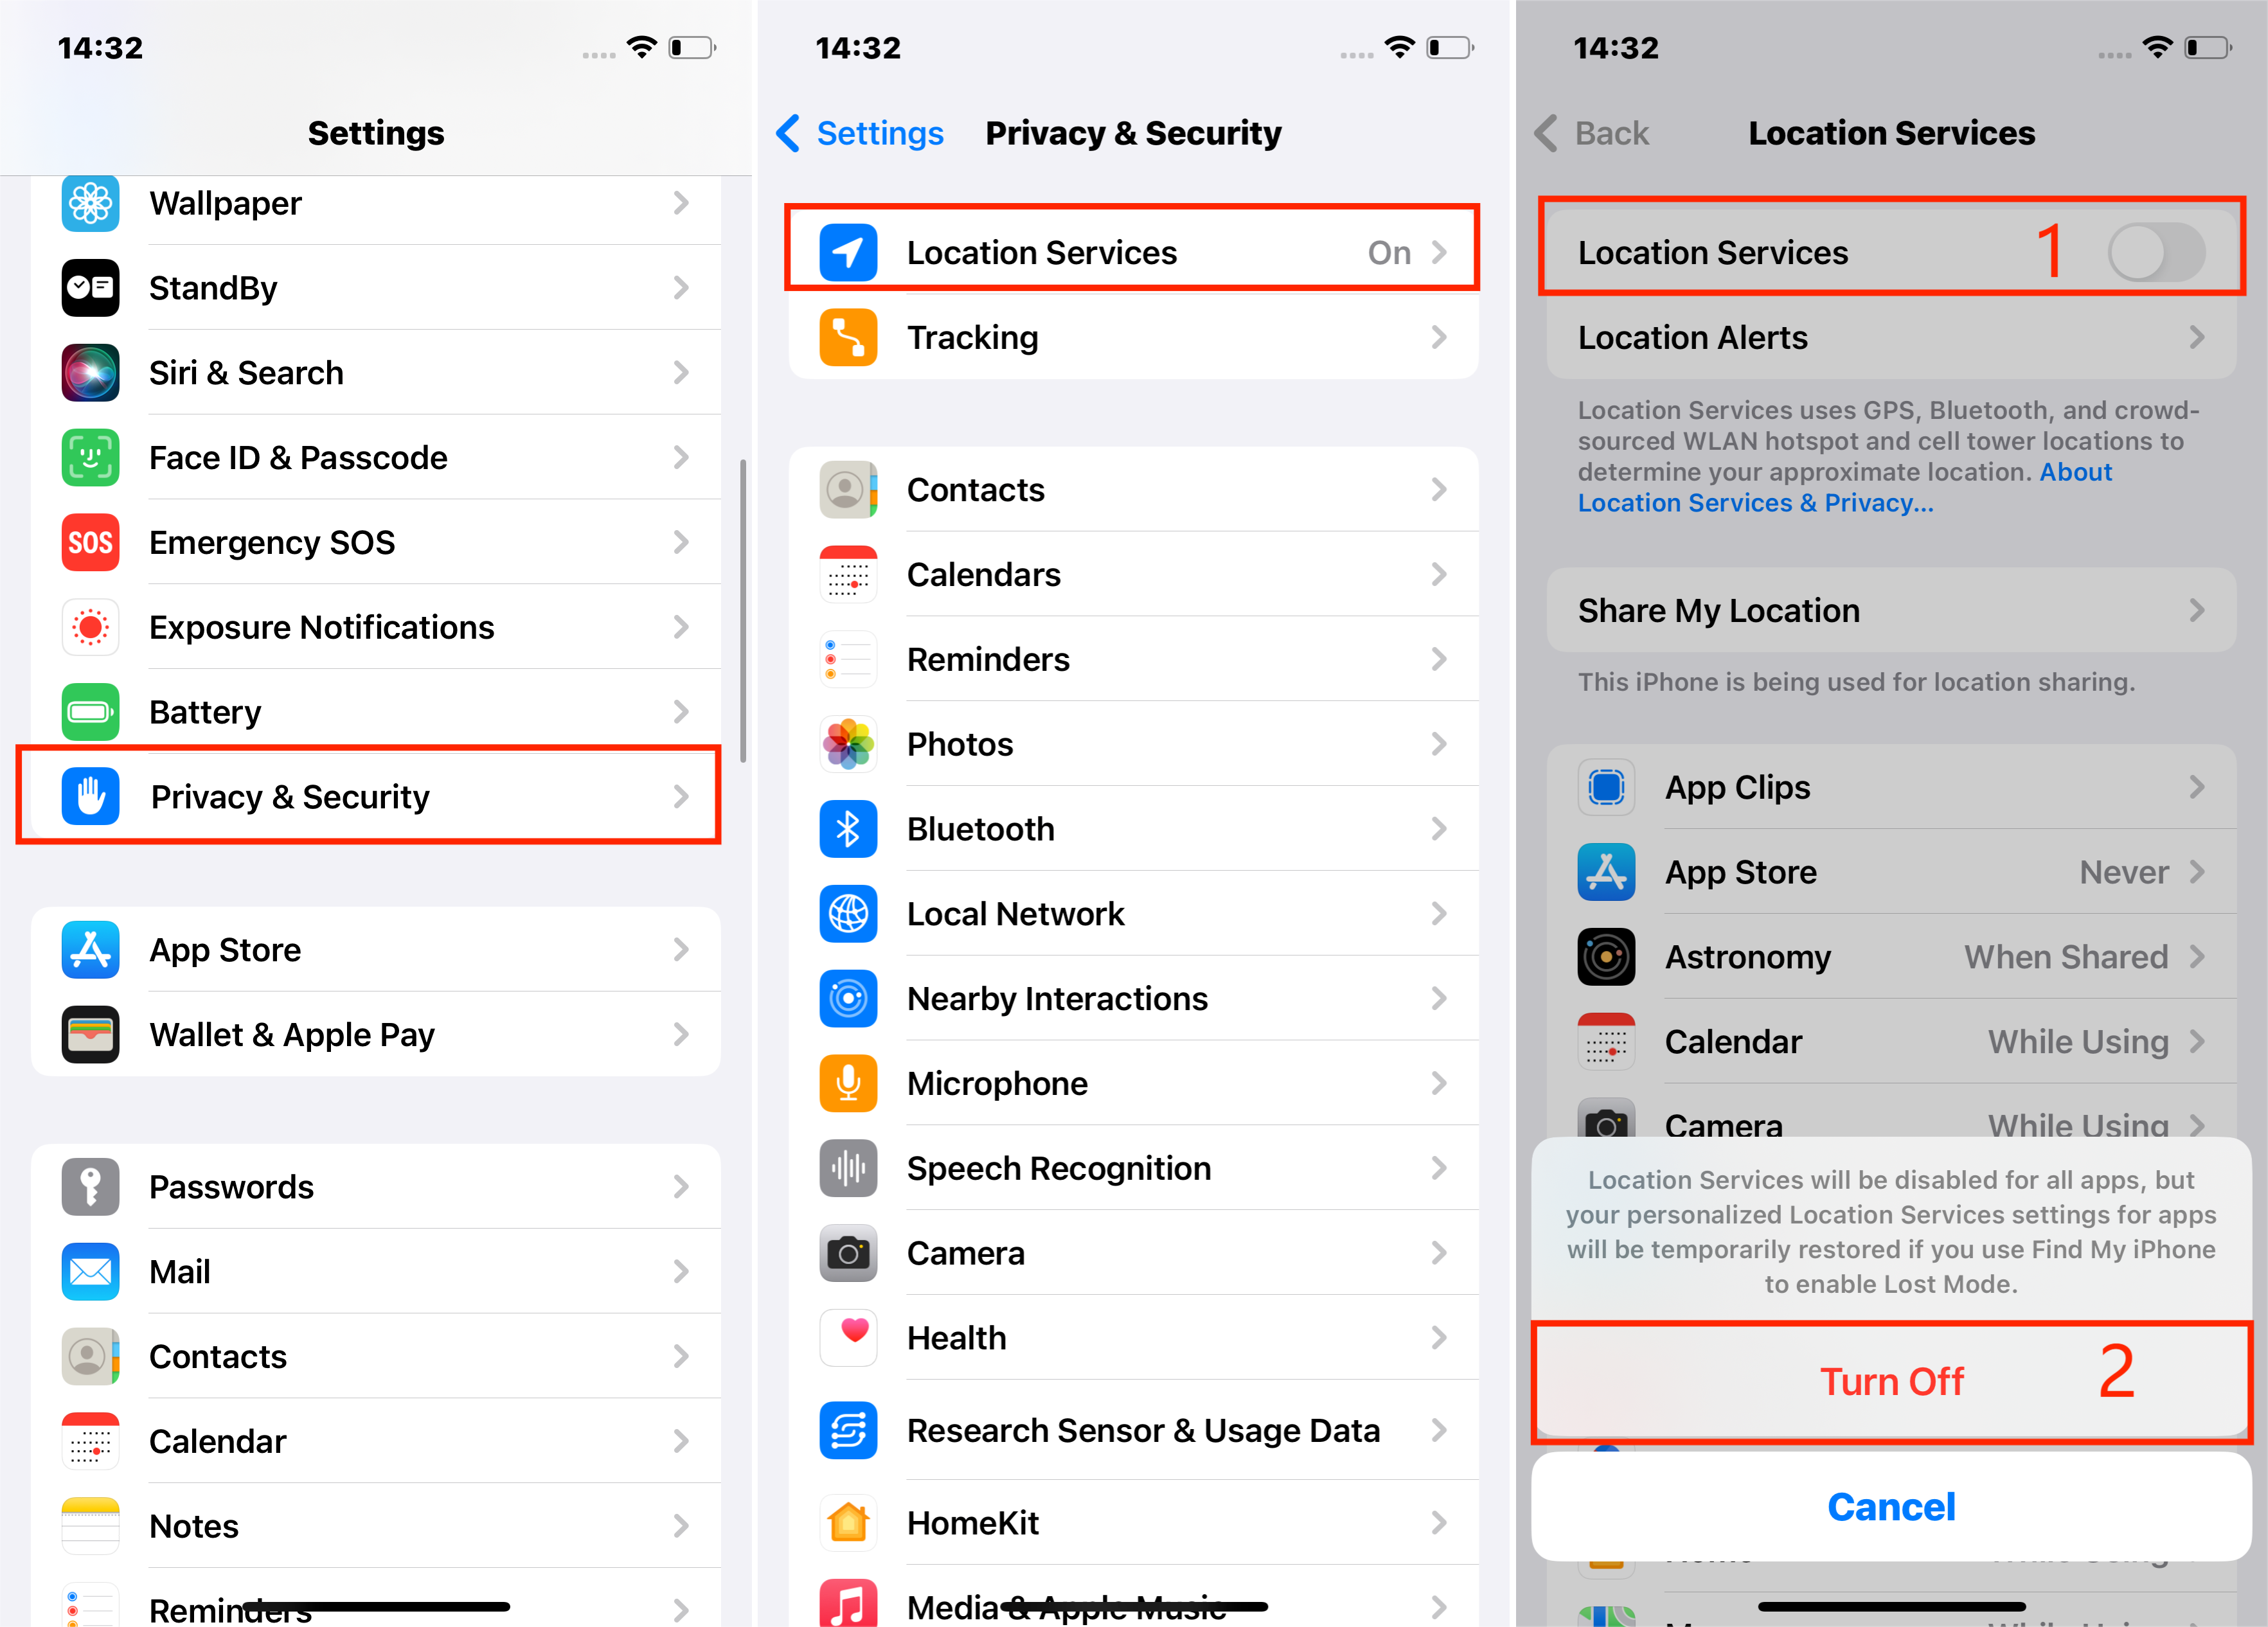 Steps to Turn Off Location Services on iPhone